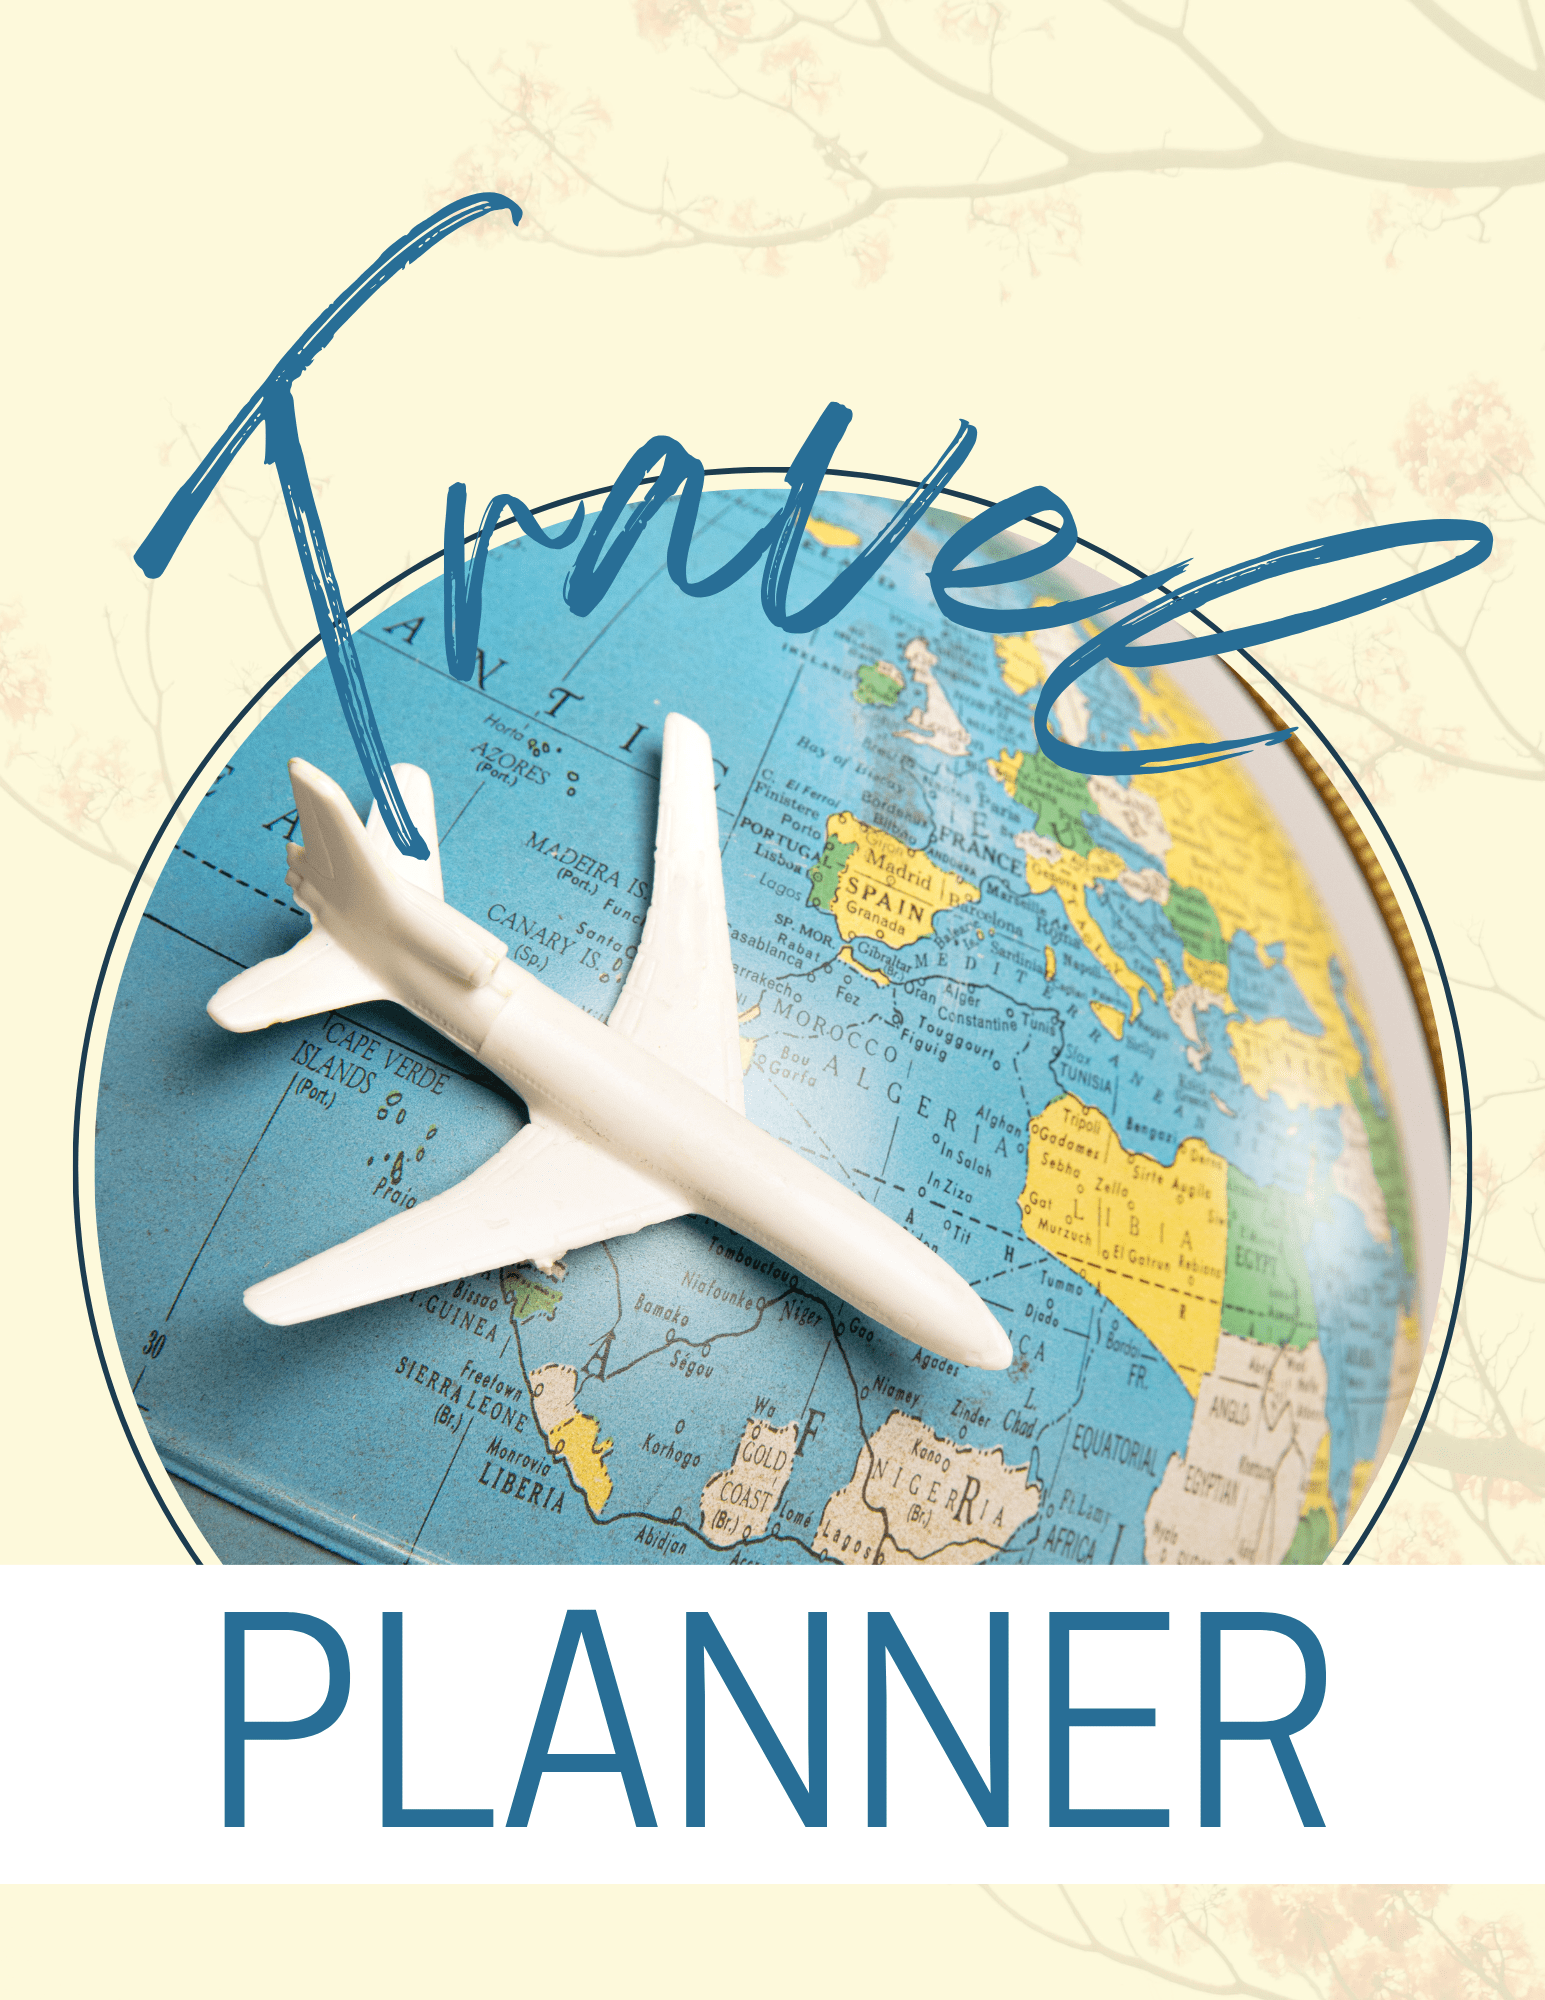 Travel planner image with a small white plane on a globe.